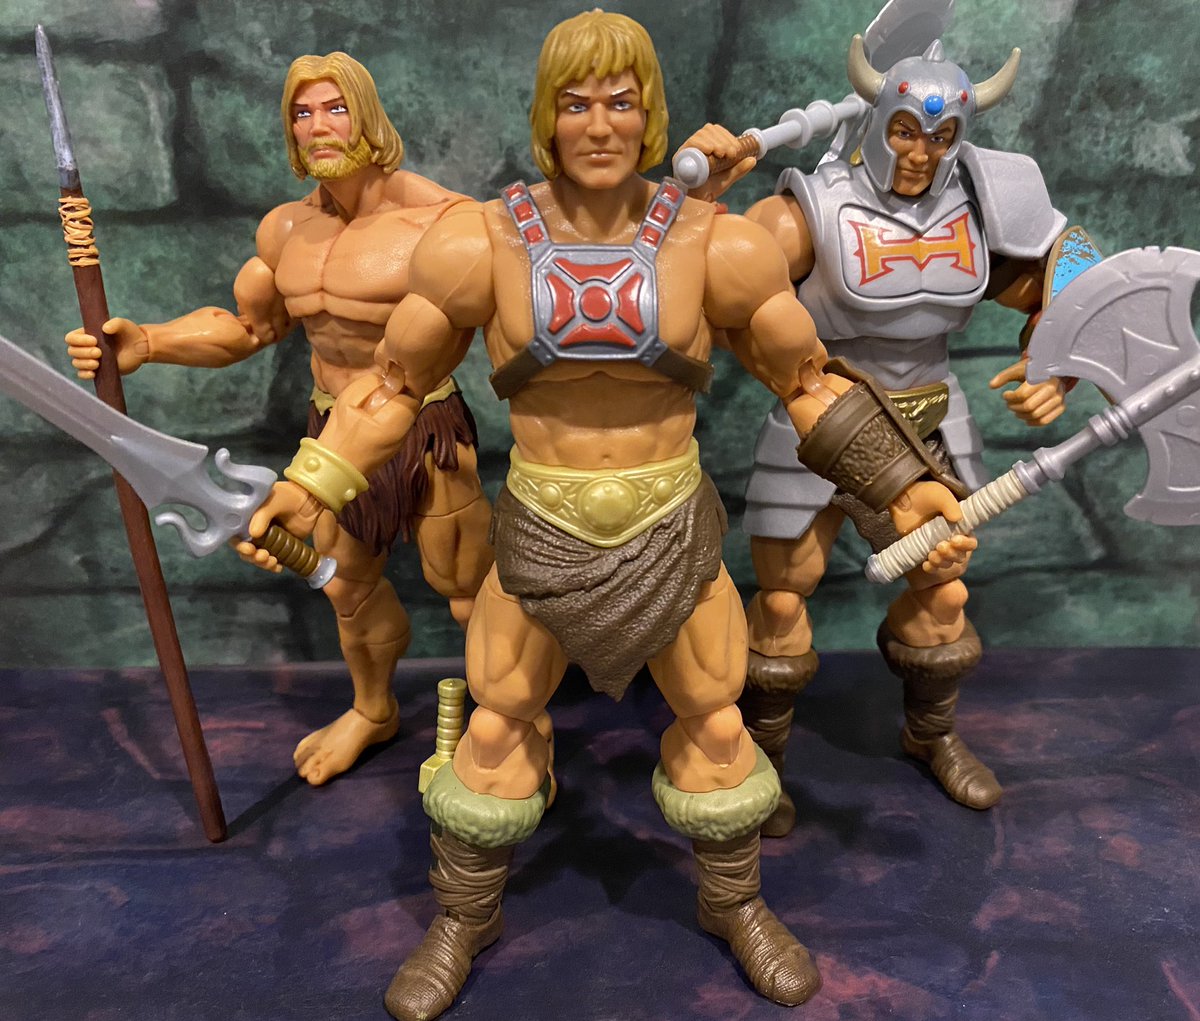 Not my idea but I really dig this setup for new Eternia He-mans.